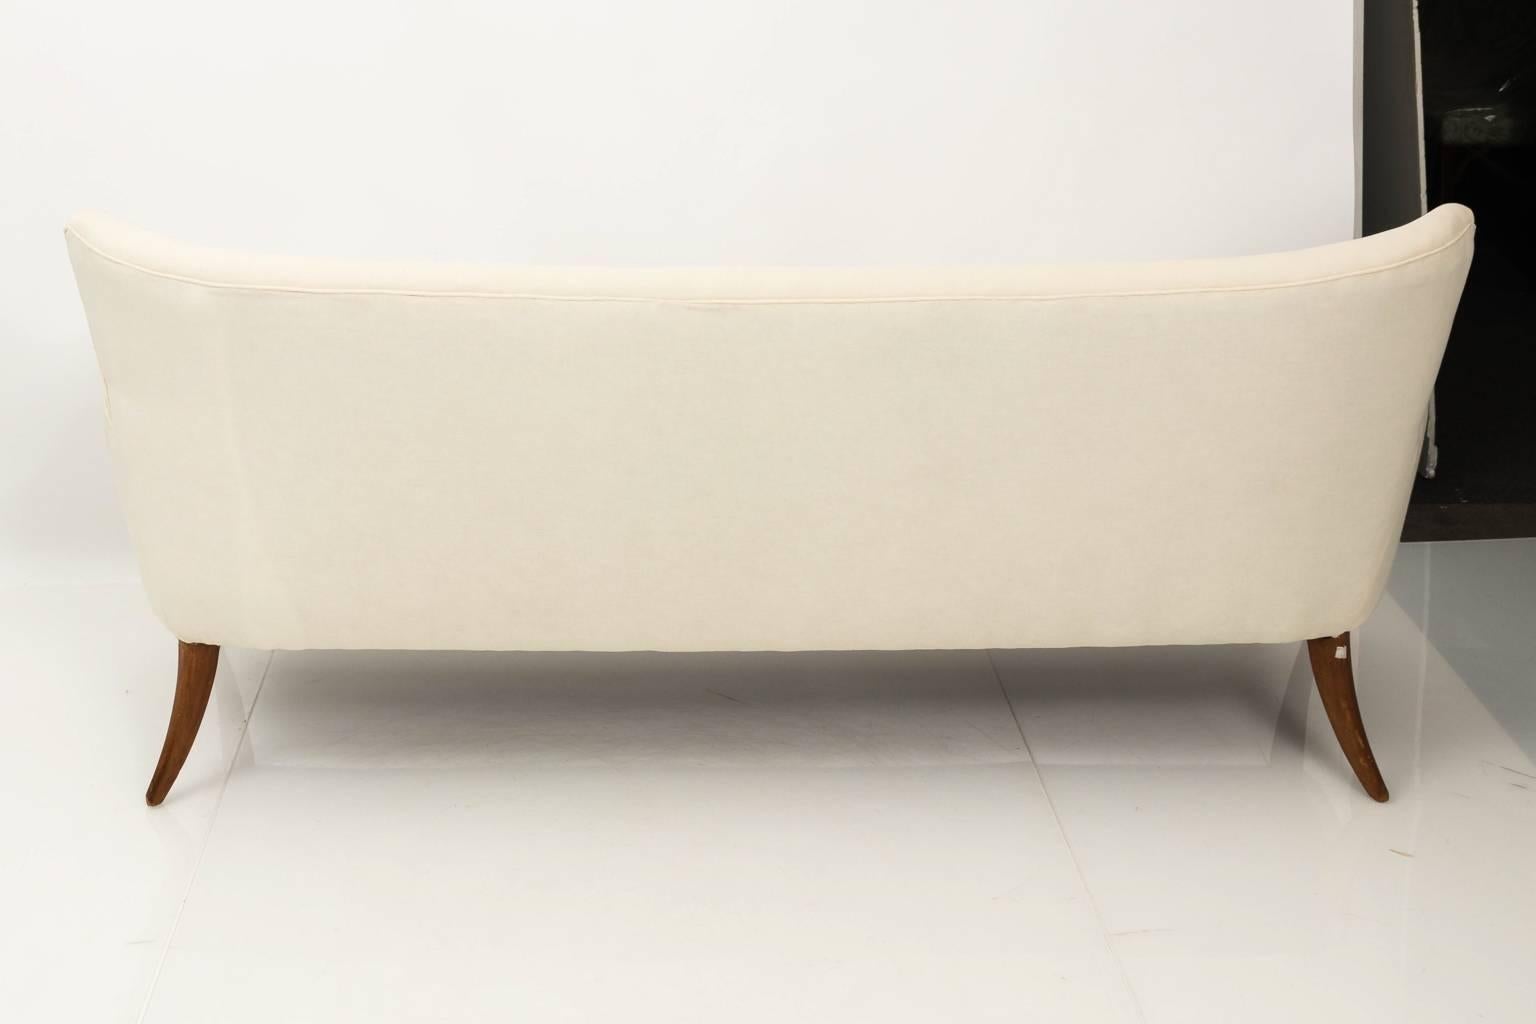 1950s re-upholstered walnut sofa attributed to Ersnt Schwadron, reupholstered in muslin fabric.